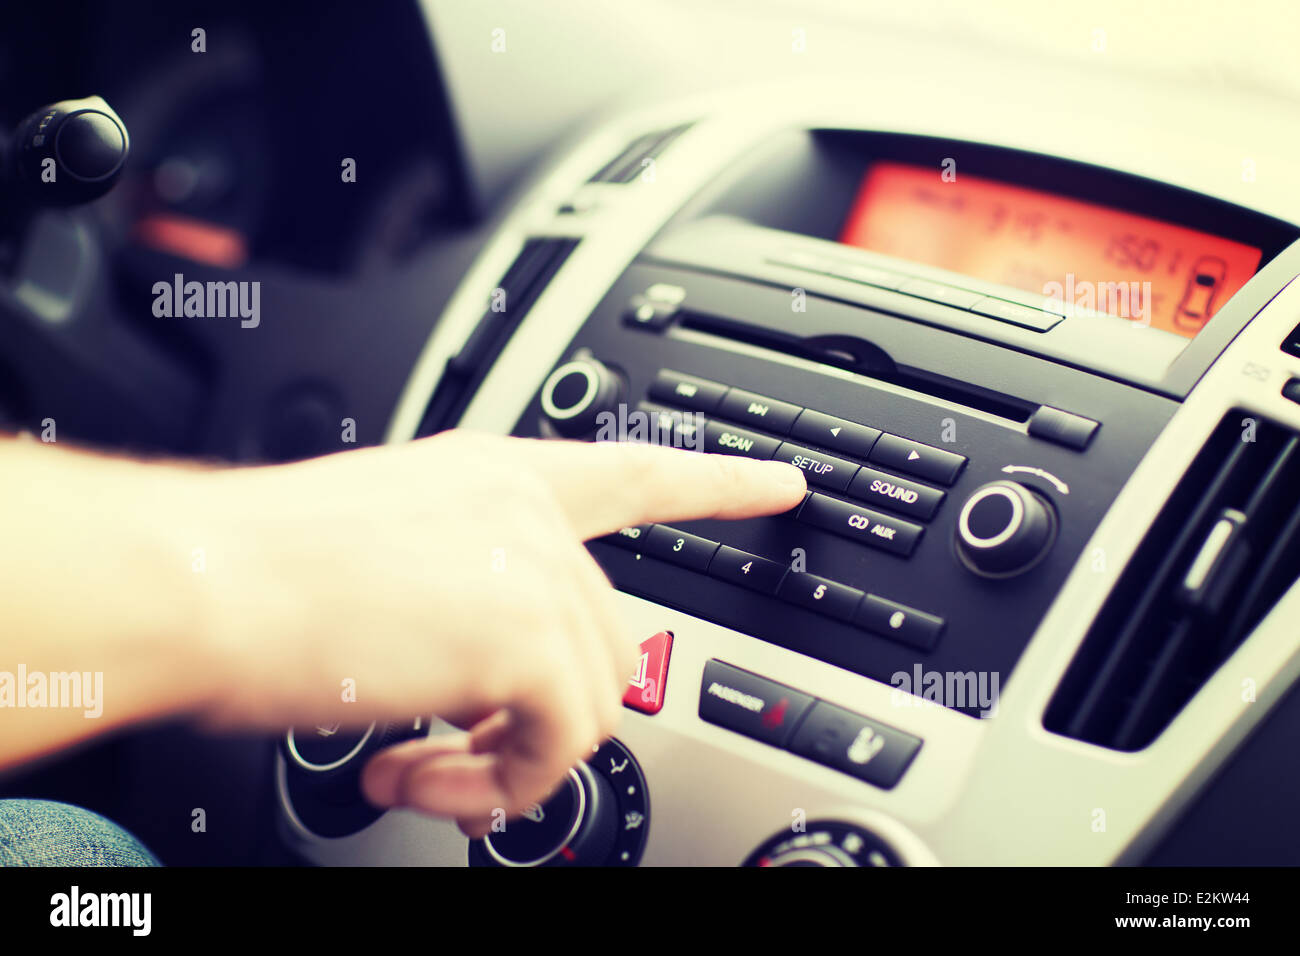 man using car audio stereo system Stock Photo